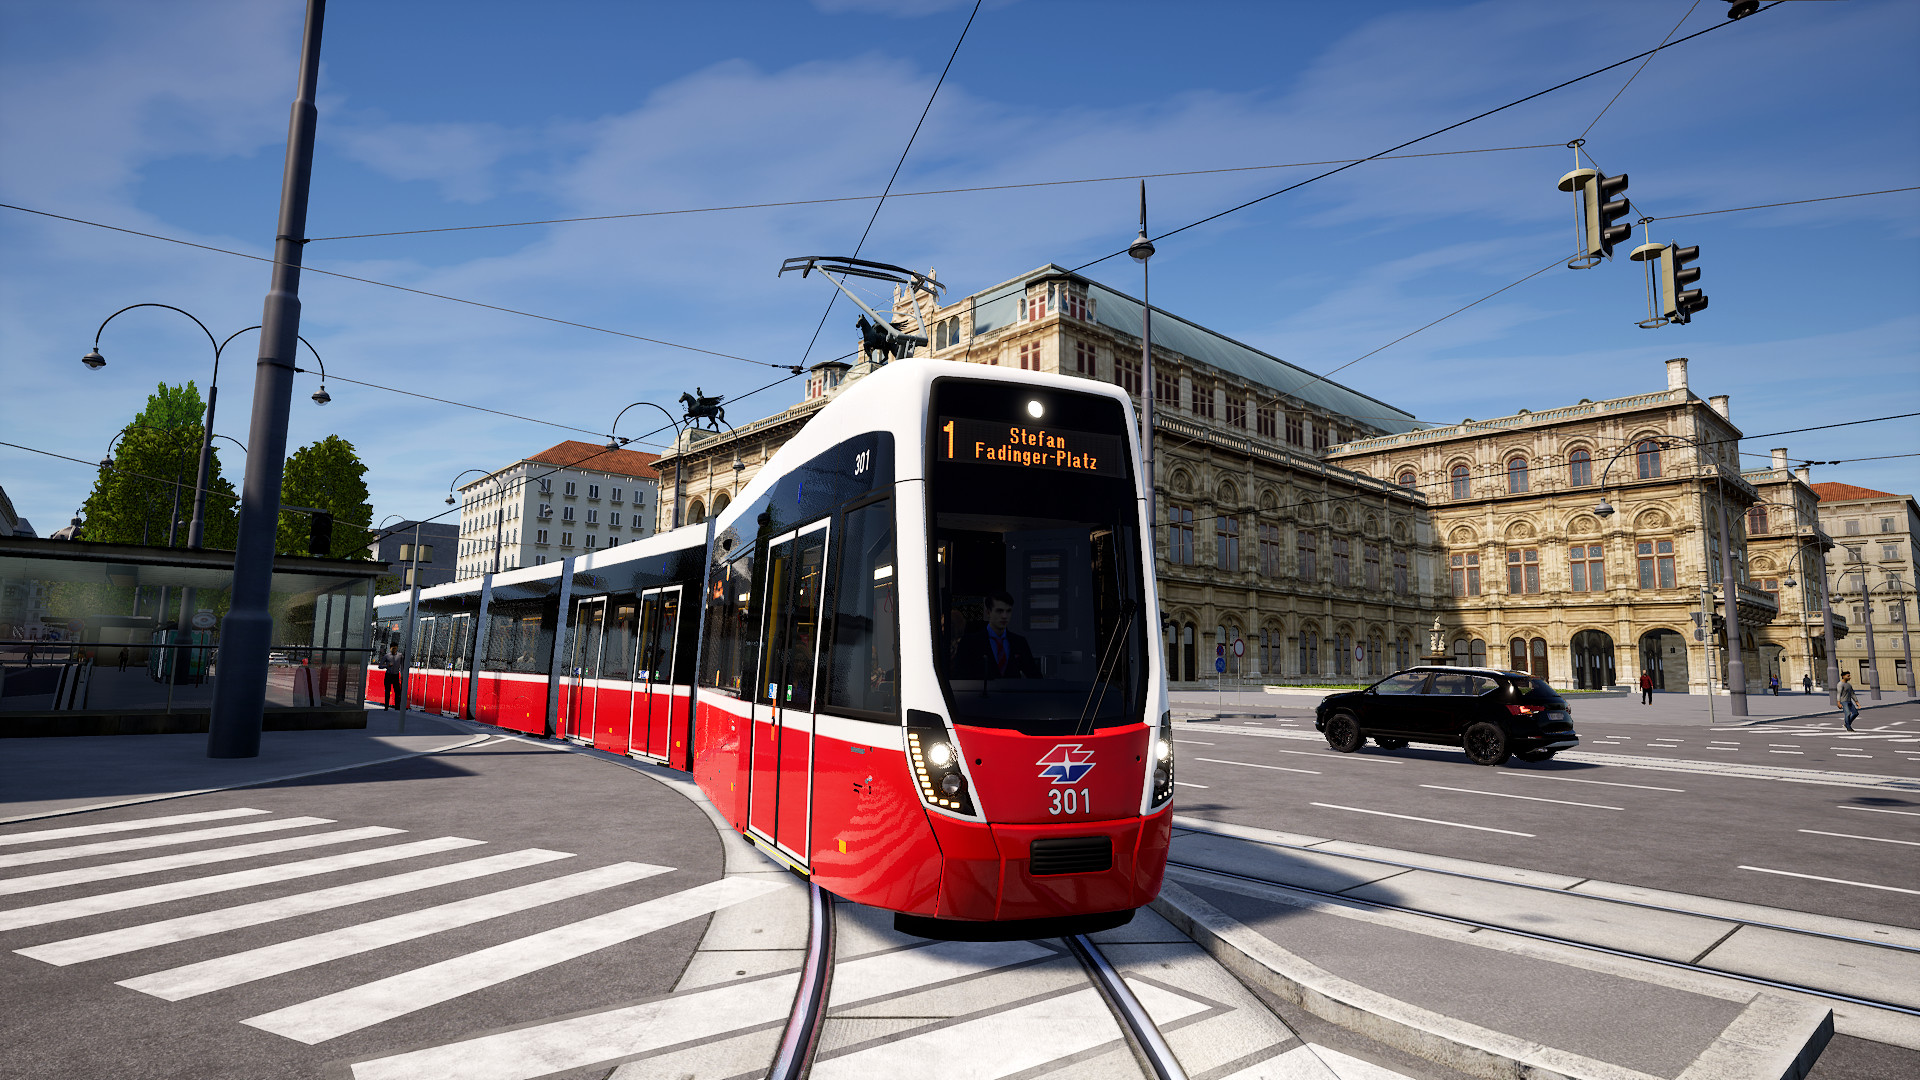 Find the best laptops for TramSim Vienna - The Tram Simulator